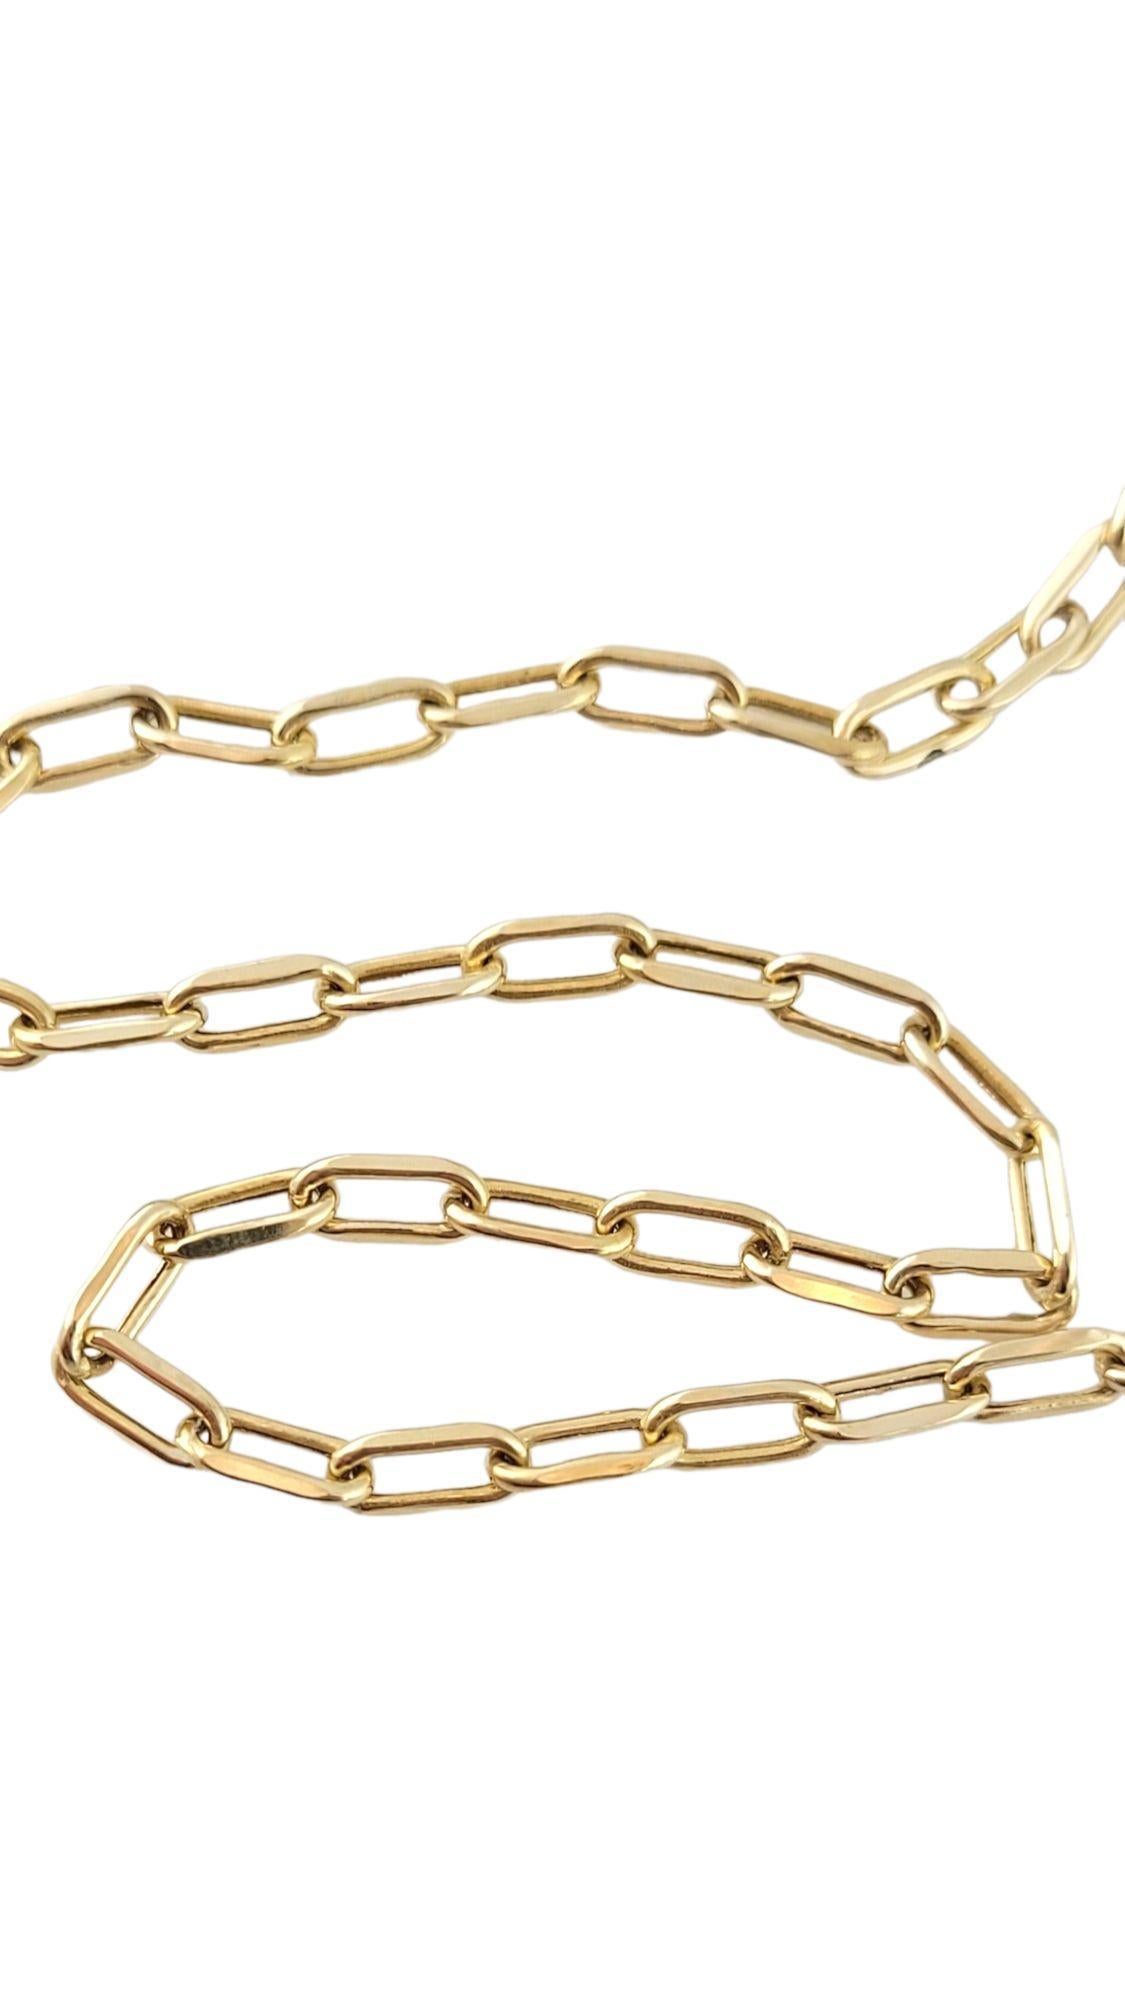 Vintage 14K Yellow Gold Paper Clip Oval Link Chain

Beautiful link chain crafted from 14K yellow gold!

Chain length: 24